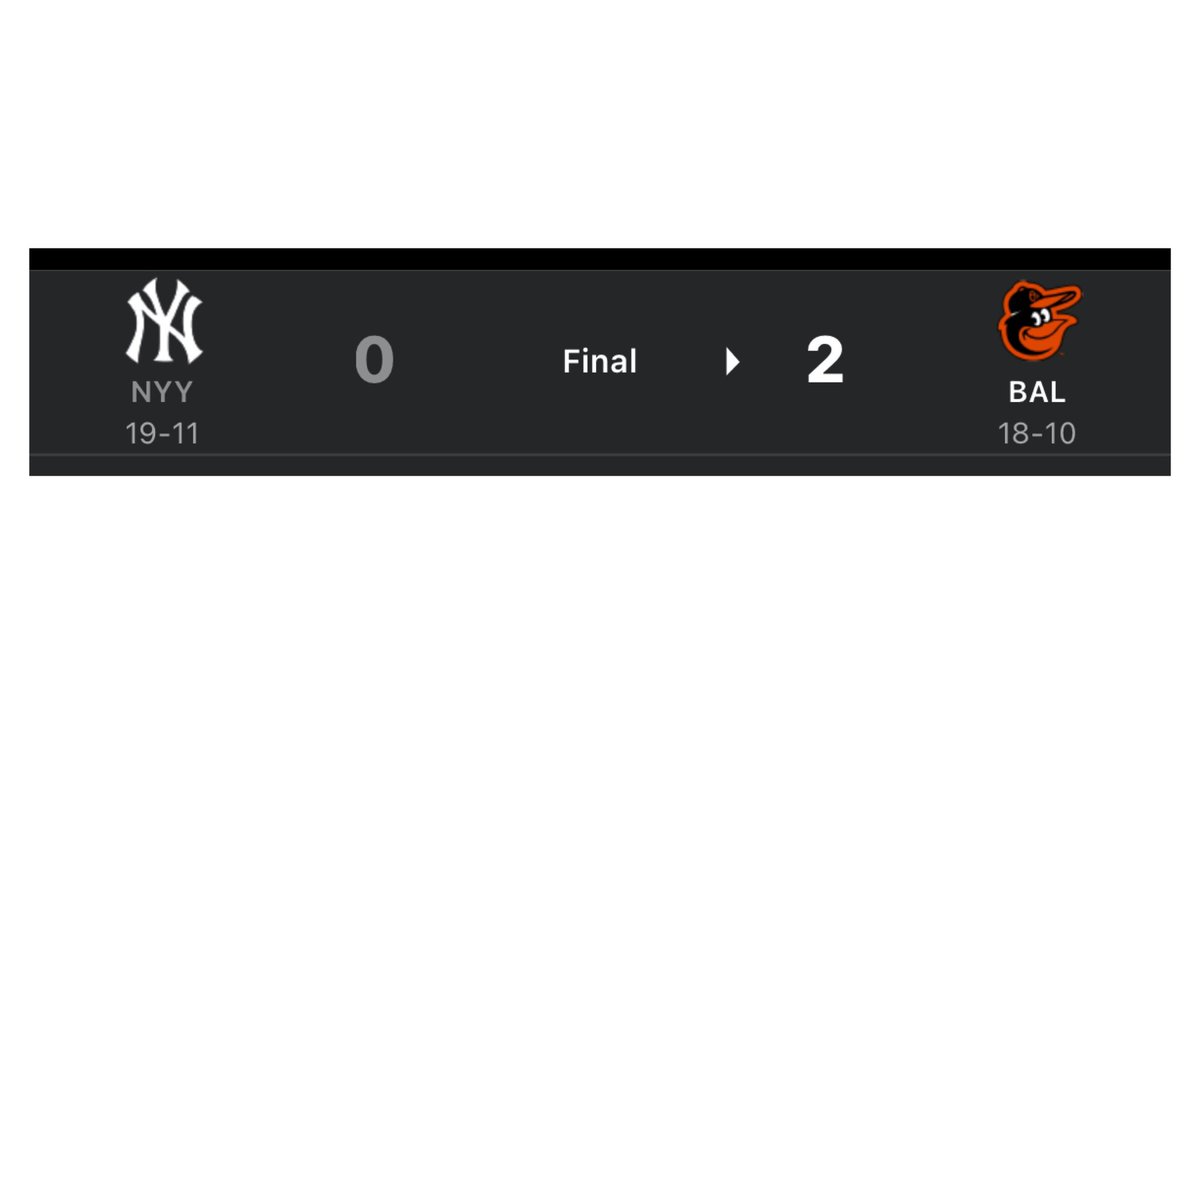 In Game 30 of the #NewYork #Yankees 2024 #MajorLeagueBaseball Season, played on April 29, 2024, The New York Yankees lost to The #Baltimore #Orioles; The New York Yankees record  is now: 19-11

#AaronJudge’s 2024 #HomeRun Count: 6